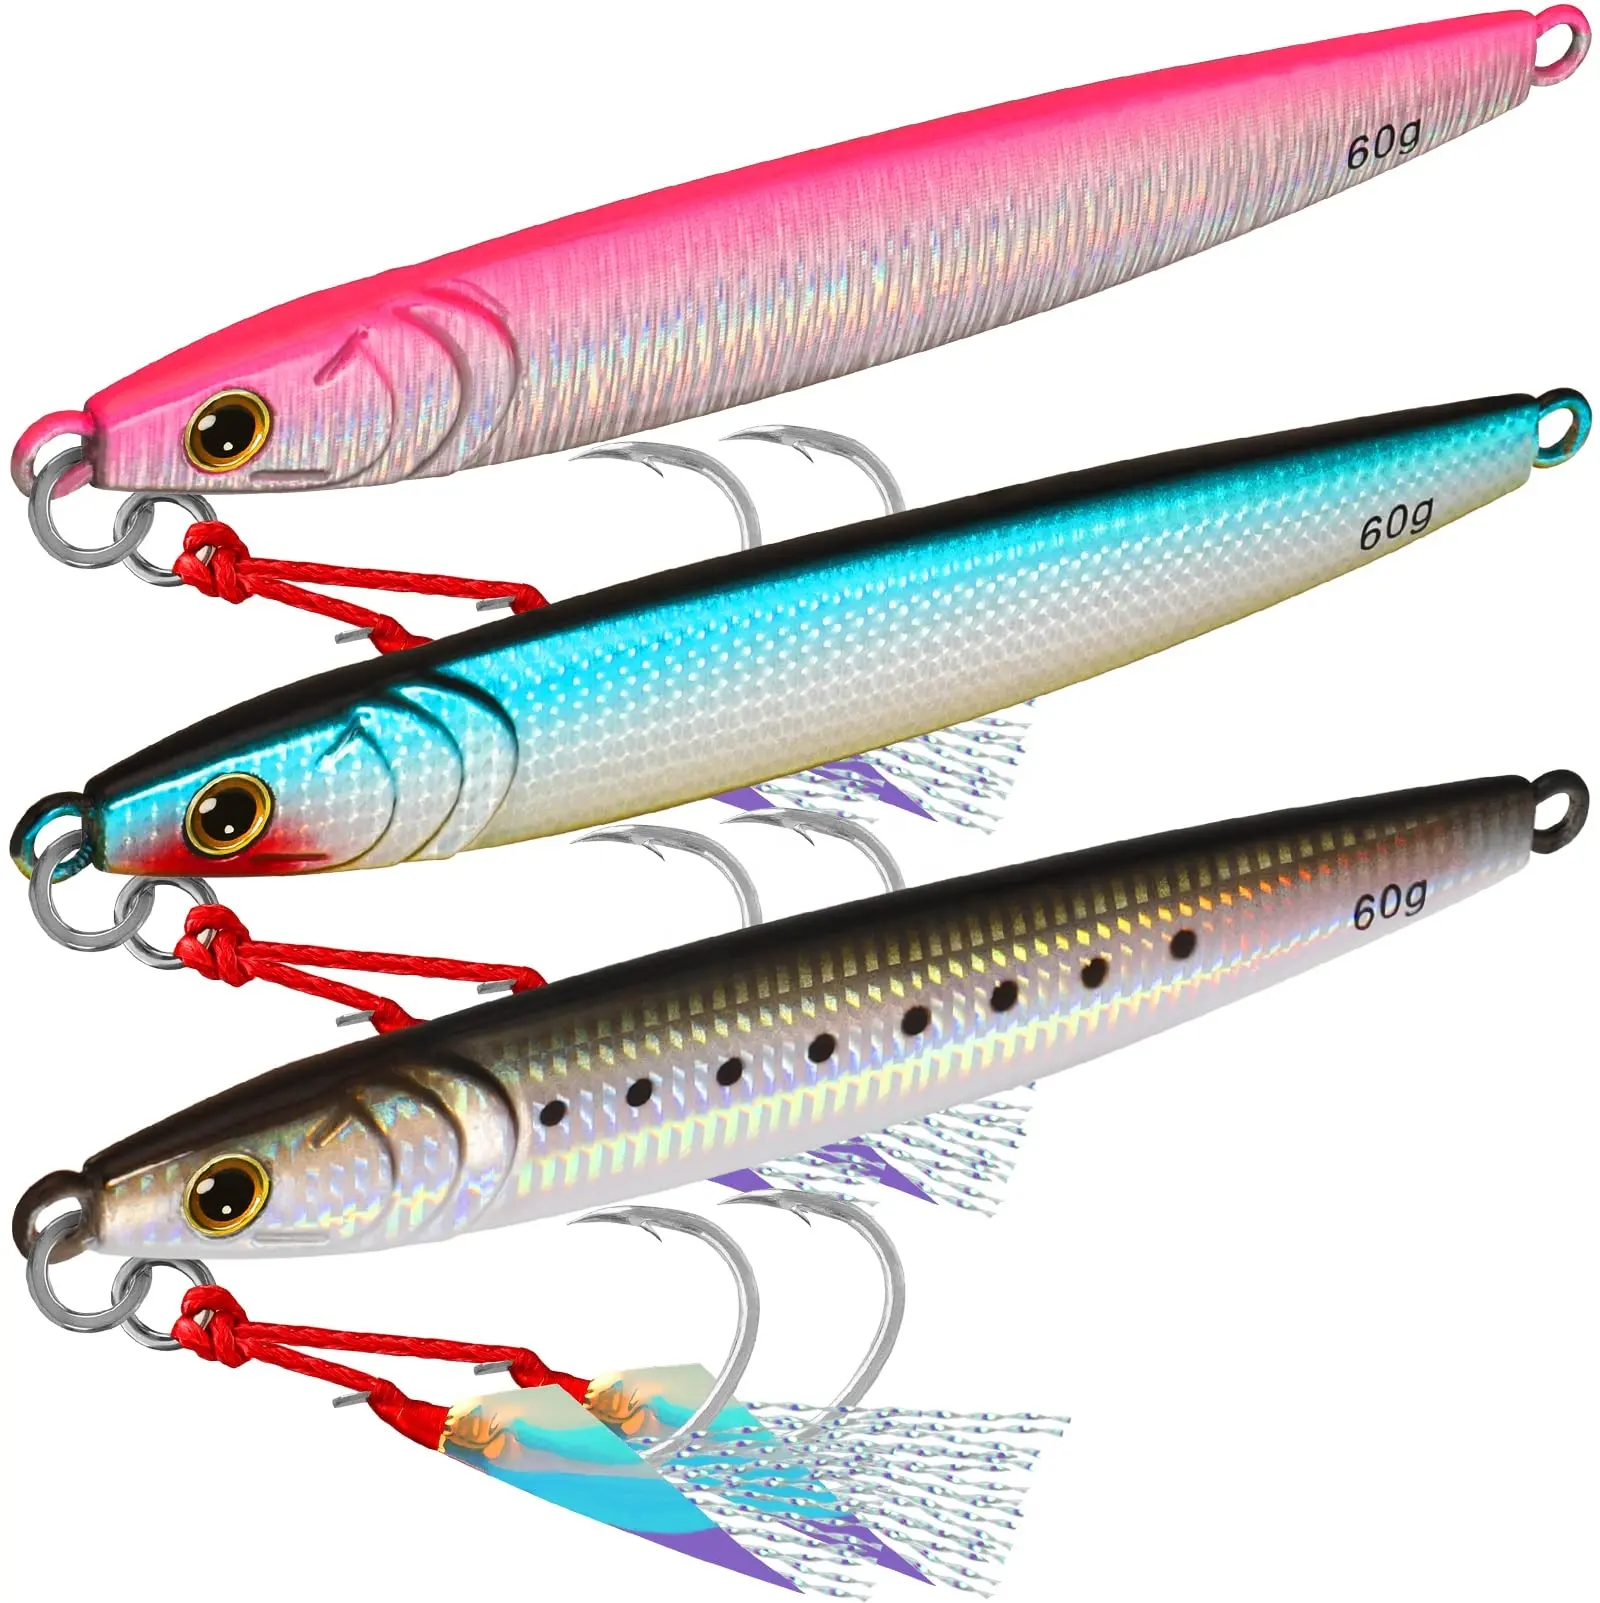 Truscend Amazon Best Seller Fishing Jig Lures wholesale fishing tackle lures Artificial hard Bait for sea fishing